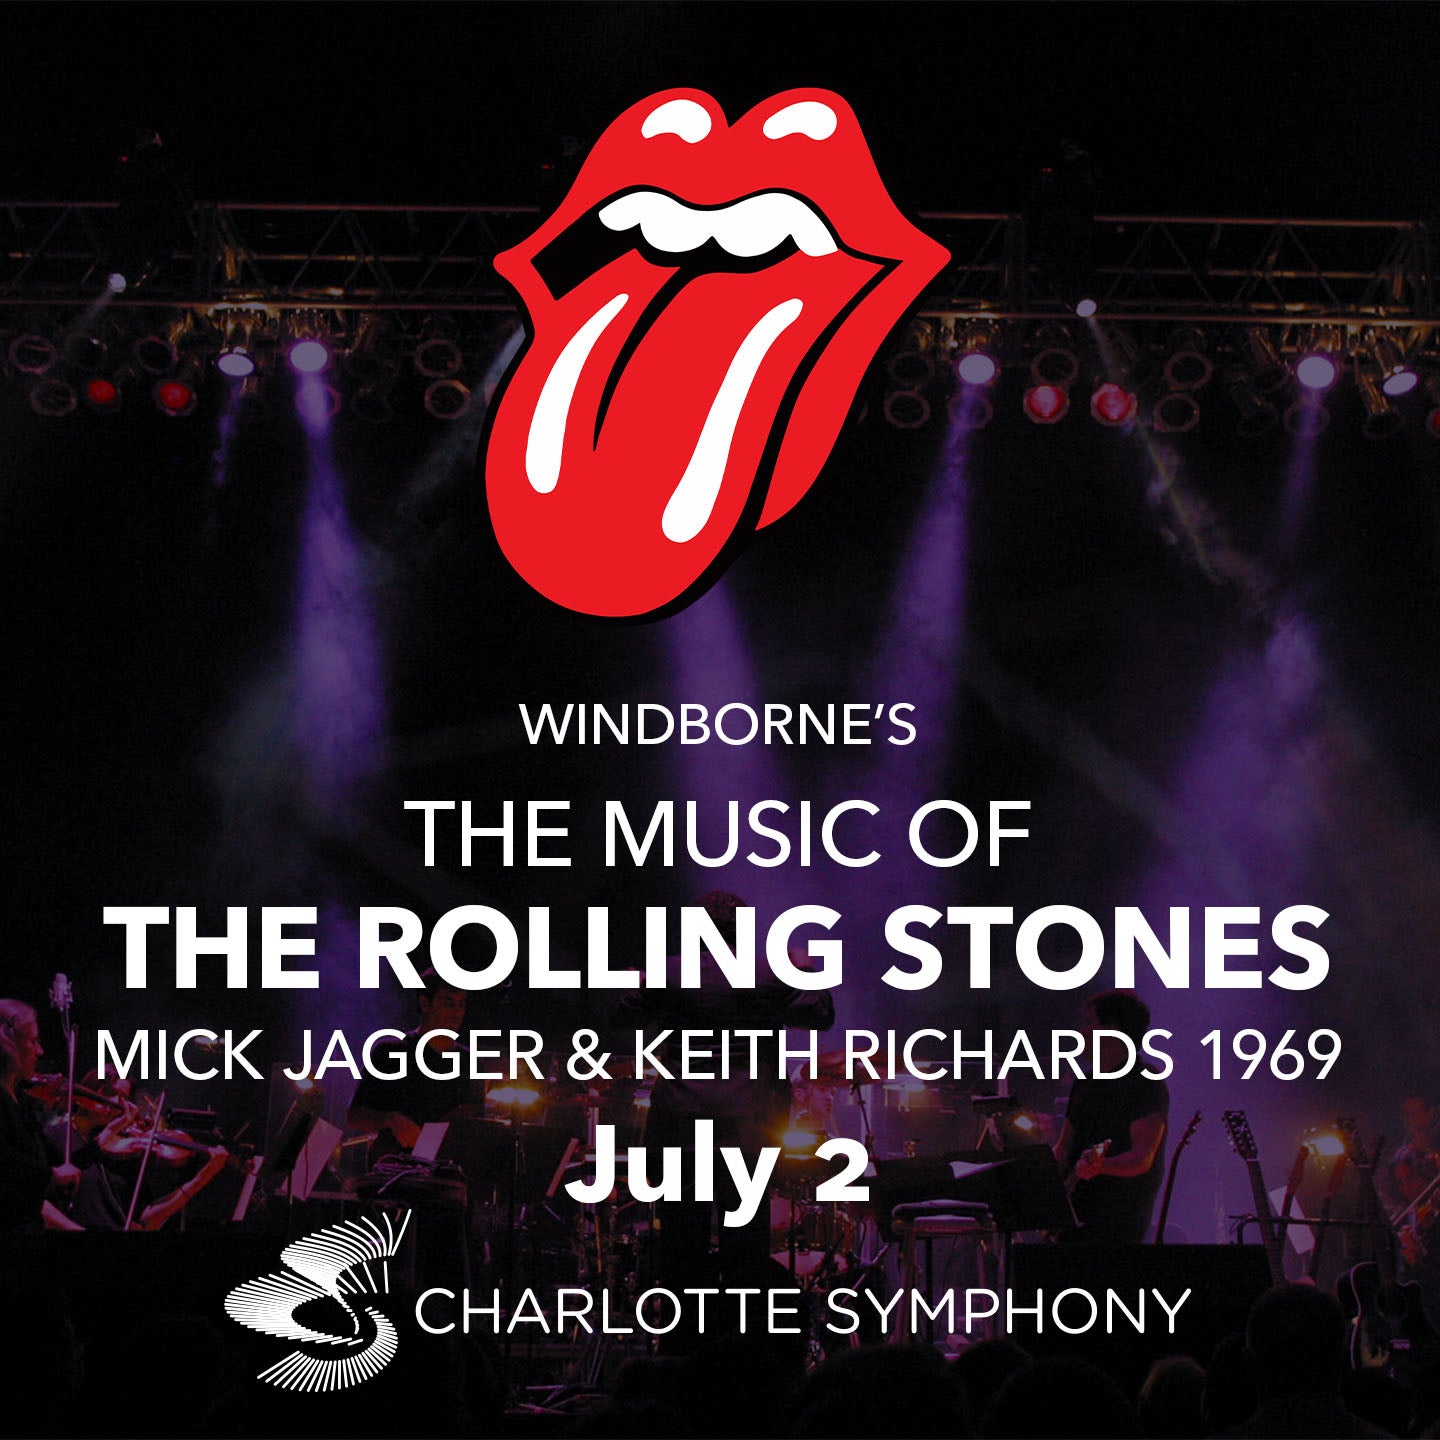 Charlotte Symphony: The Music of the Rolling Stones